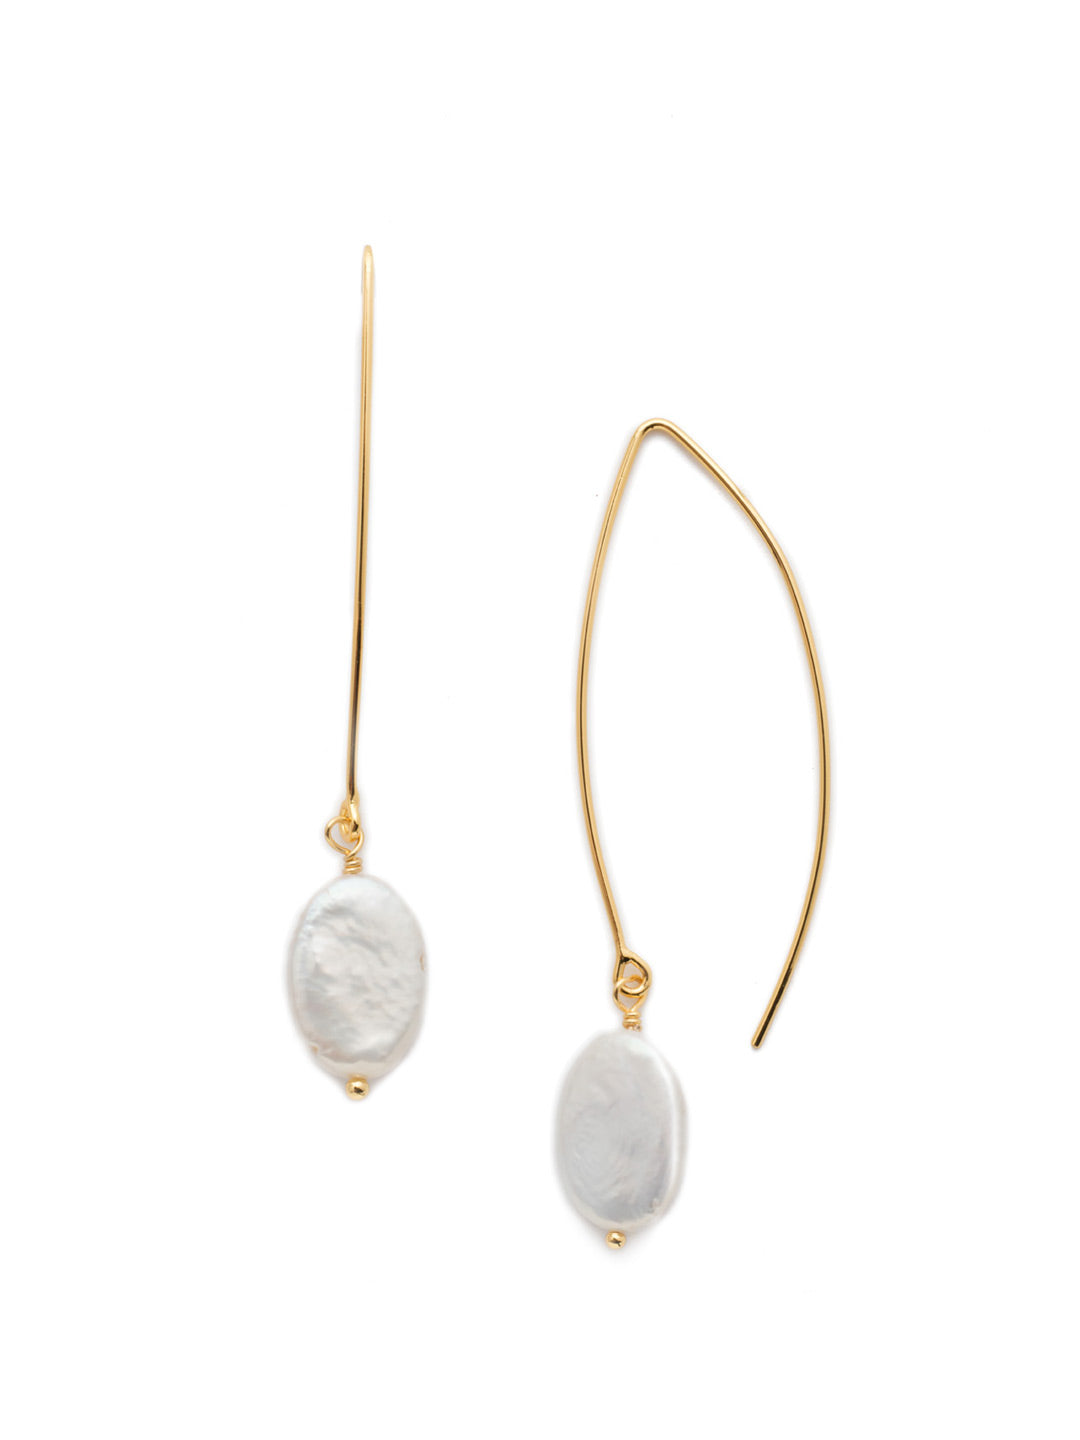 Finch Dangle Earrings - 4EES51BGMDP - <p>The Finch Dangle Earrings are proof-positive that sometimes less is more. Their unique slim metal base drips with a single freshwater pearl that's undeniably fashionable. From Sorrelli's Modern Pearl collection in our Bright Gold-tone finish.</p>